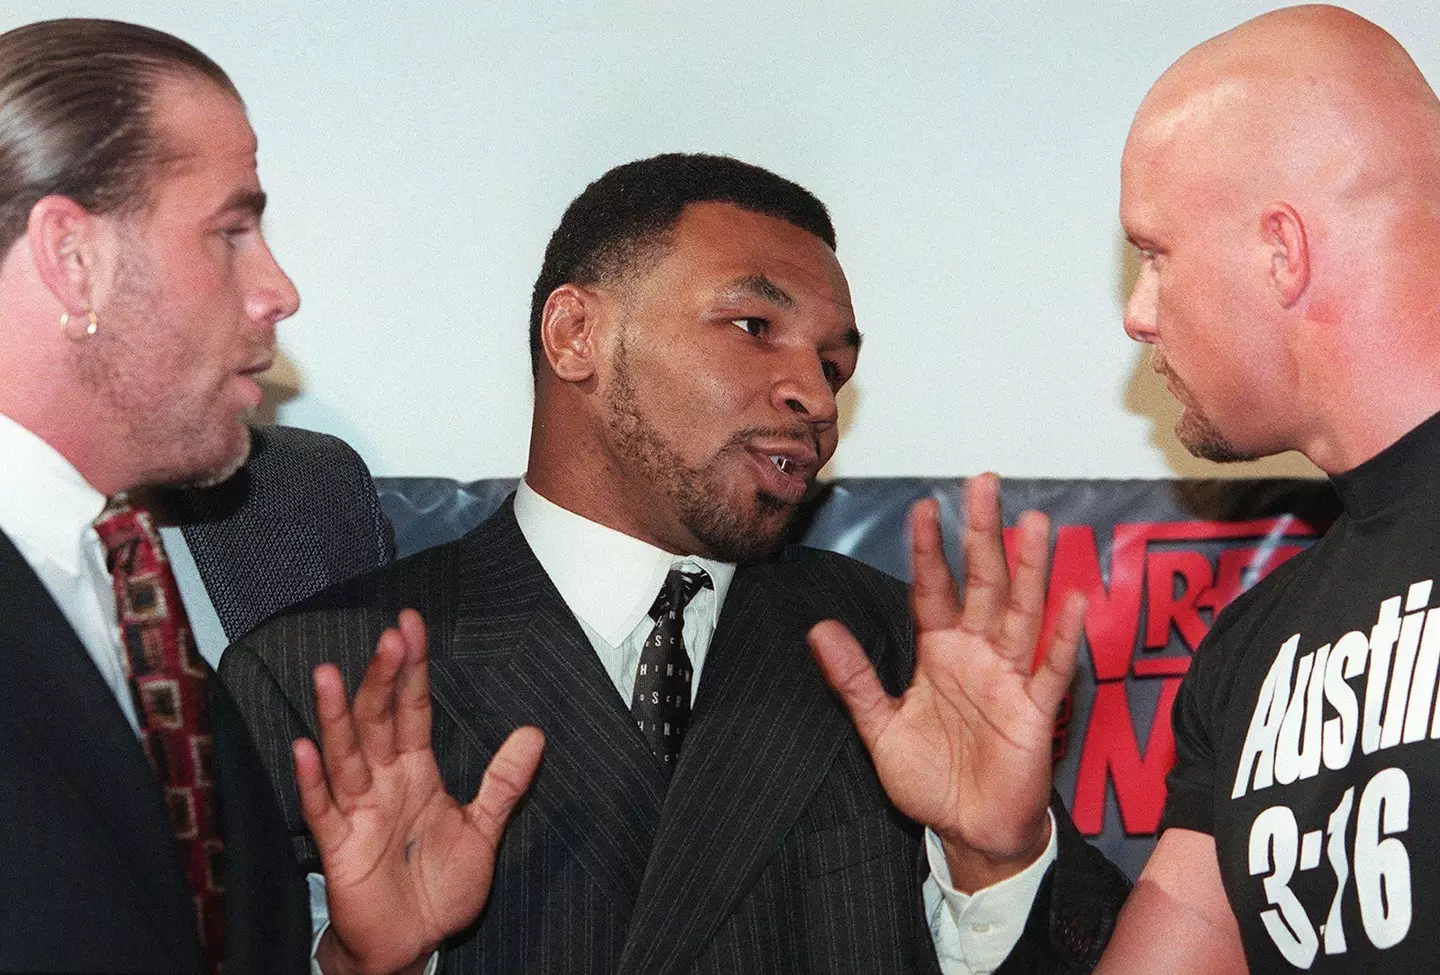 Mike Tyson with Shawn Michaels and Stone Cold Steve Austin. (